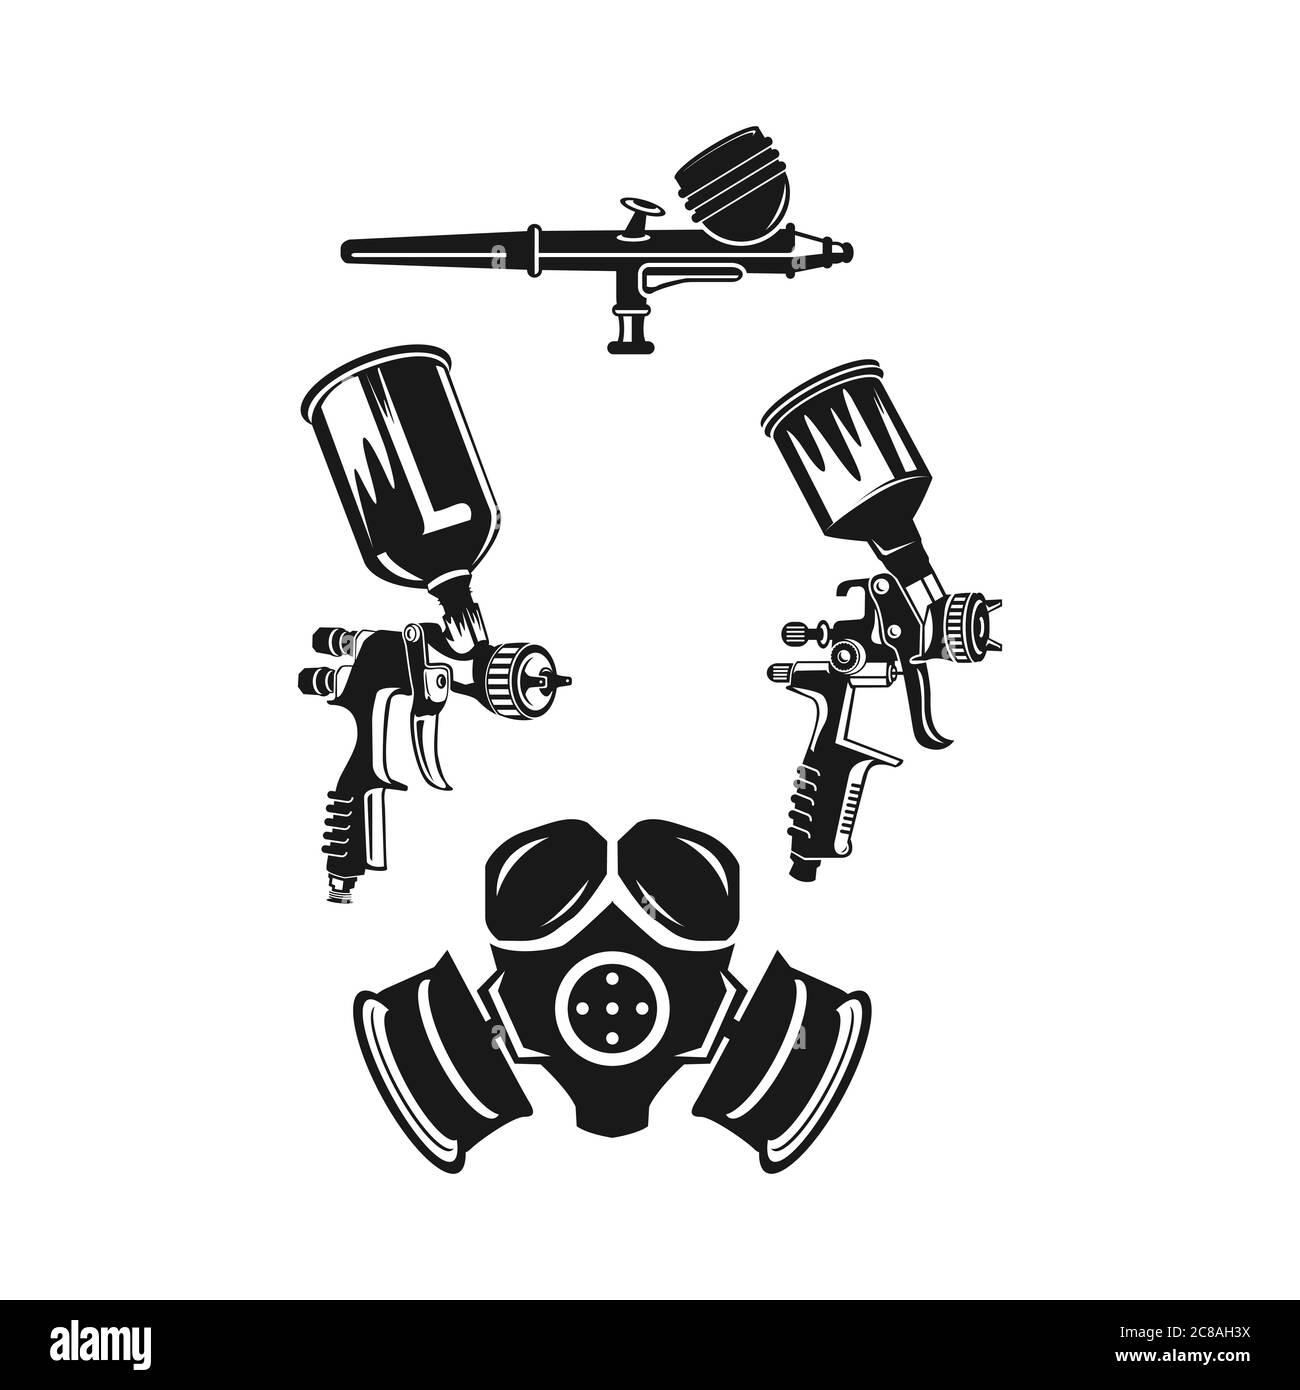 Monochrome illustration of metal spray gun and mask icon set. Isolated on white background.EPS 10 Stock Vector